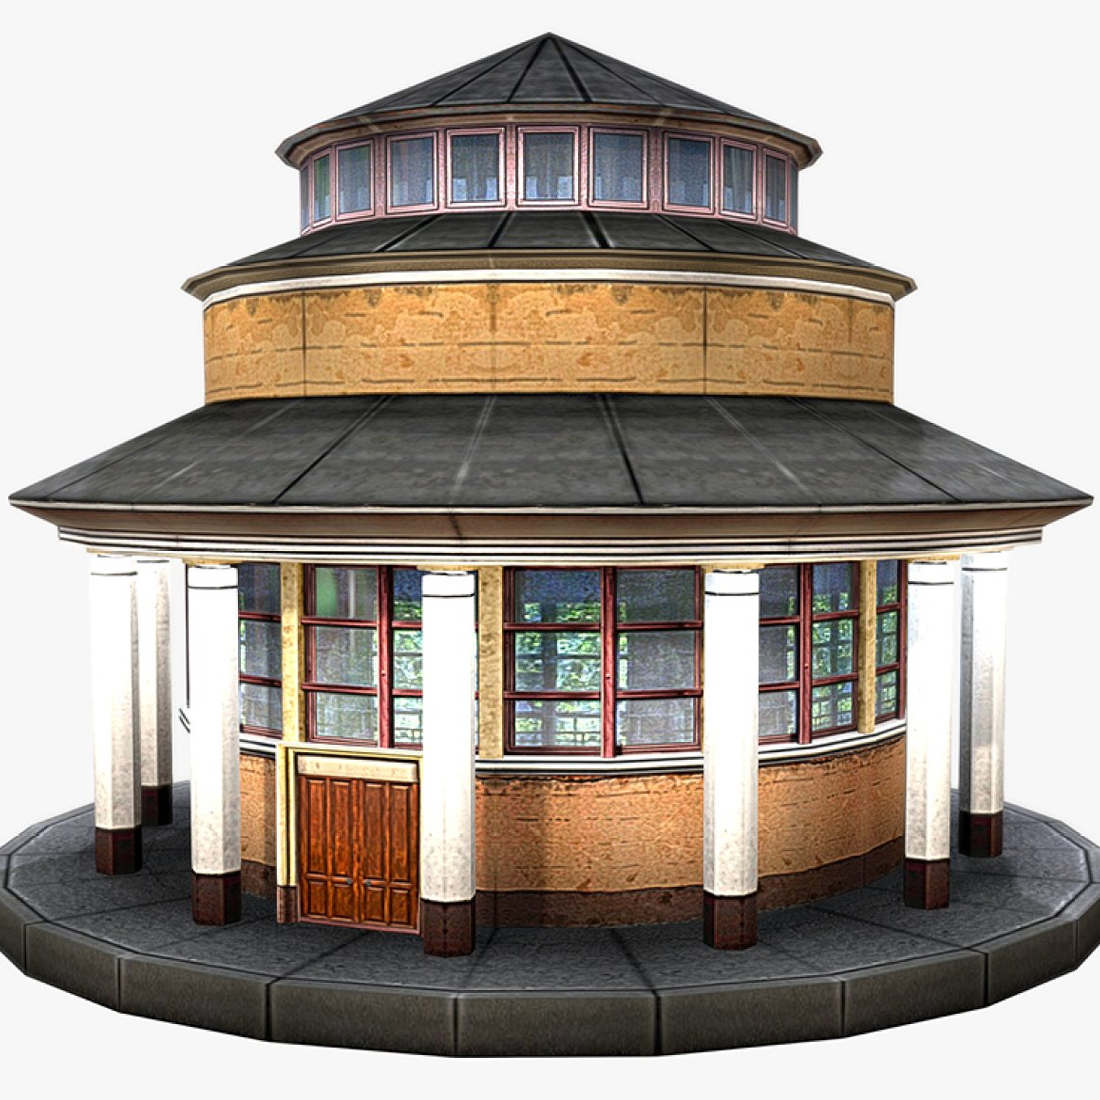 Images preview round building.